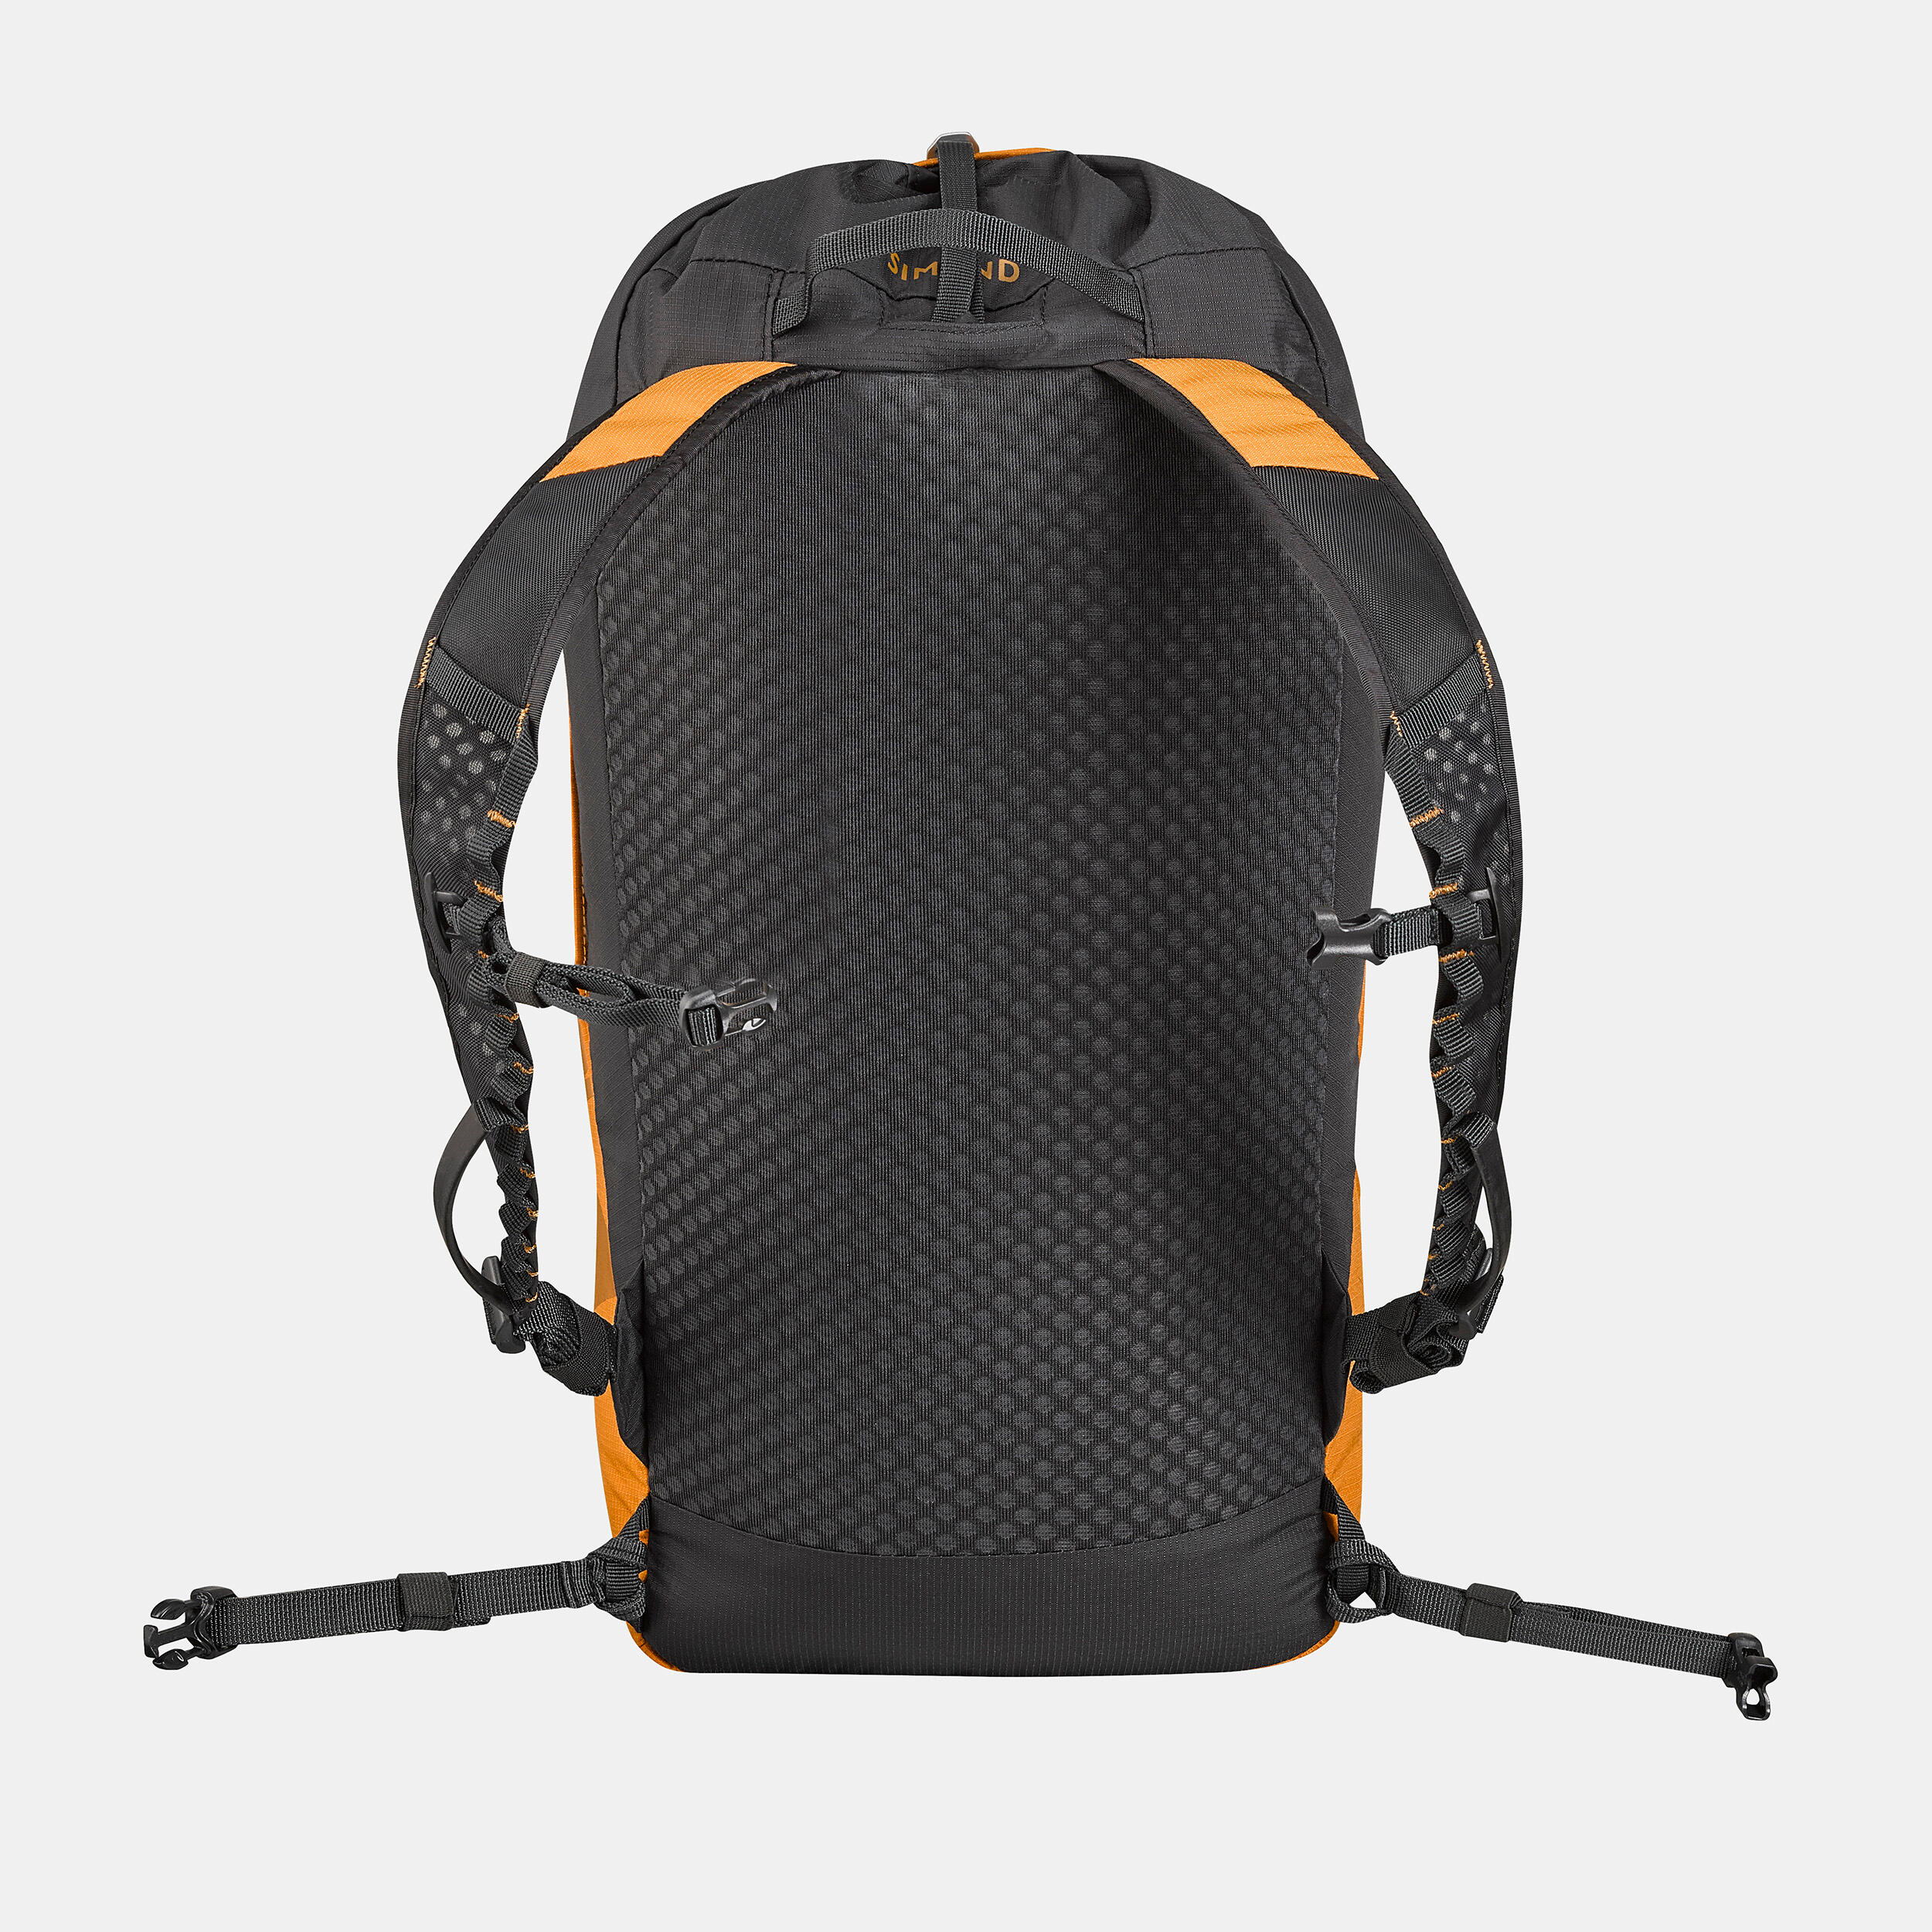 Exped - Mountain Pro 20 - Climbing backpack - Black | 20 l